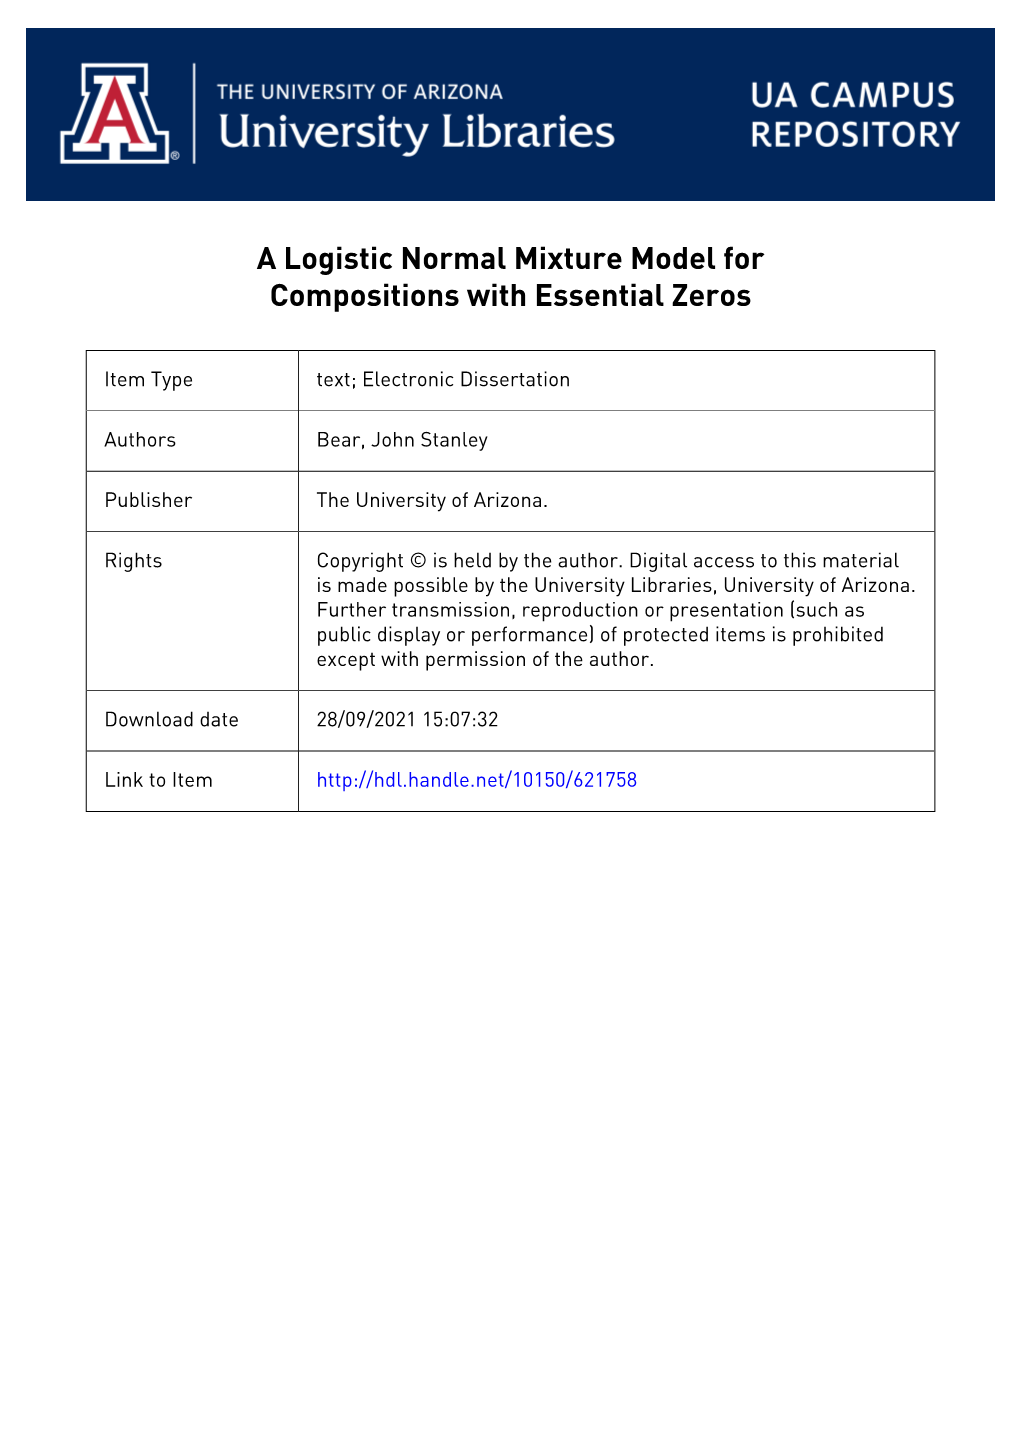 A Logistic Normal Mixture Model for Compositions with Essential Zeros